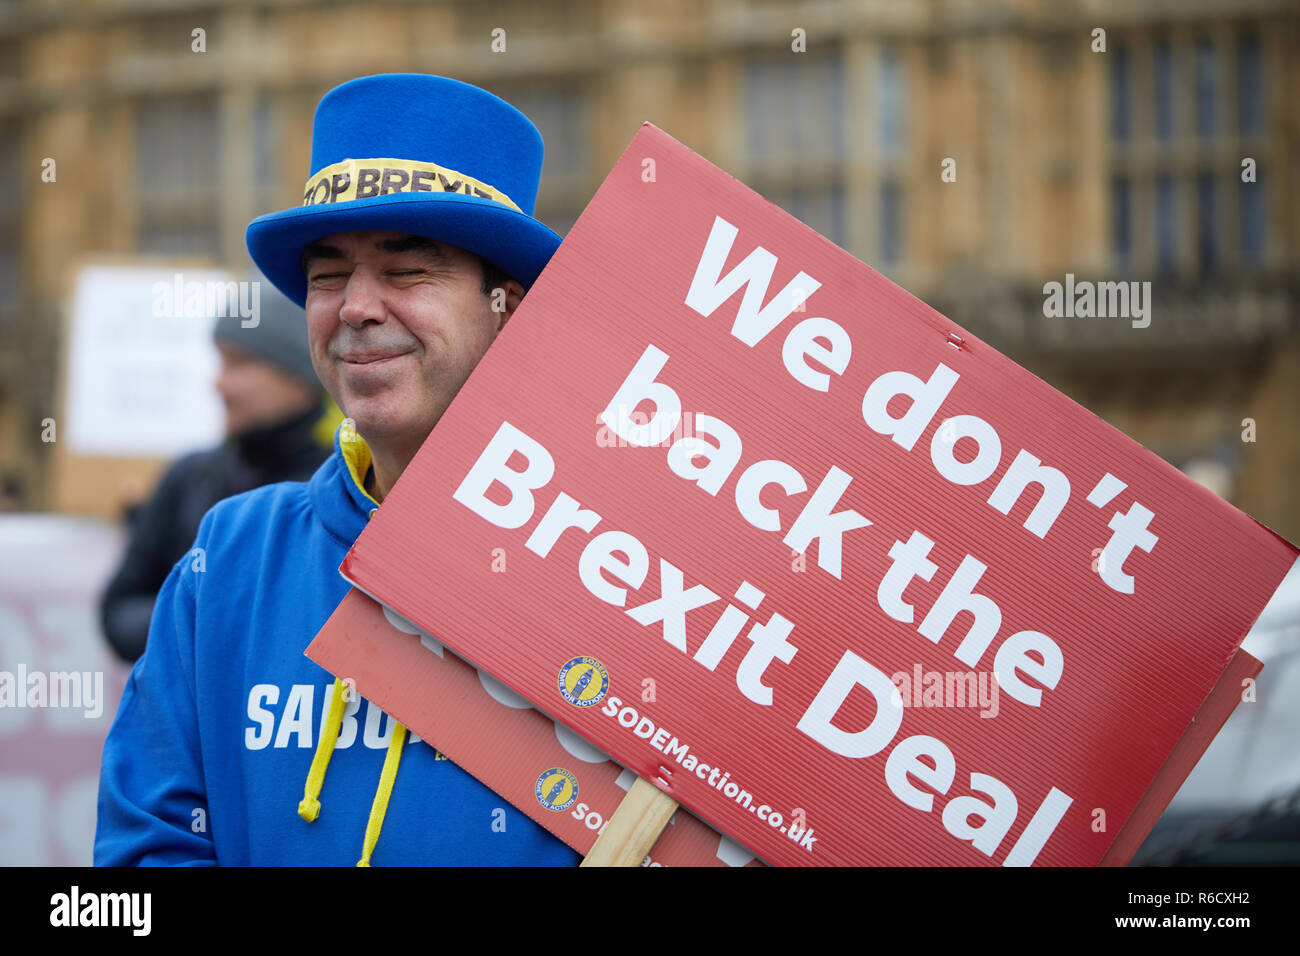 London, UK. 4th Dec, 2018. Steven Bray, founder of the Stand of Defiance European Movement, with a placard outside Parliament. Credit: Kevin J. Frost/Alamy Live News Stock Photo